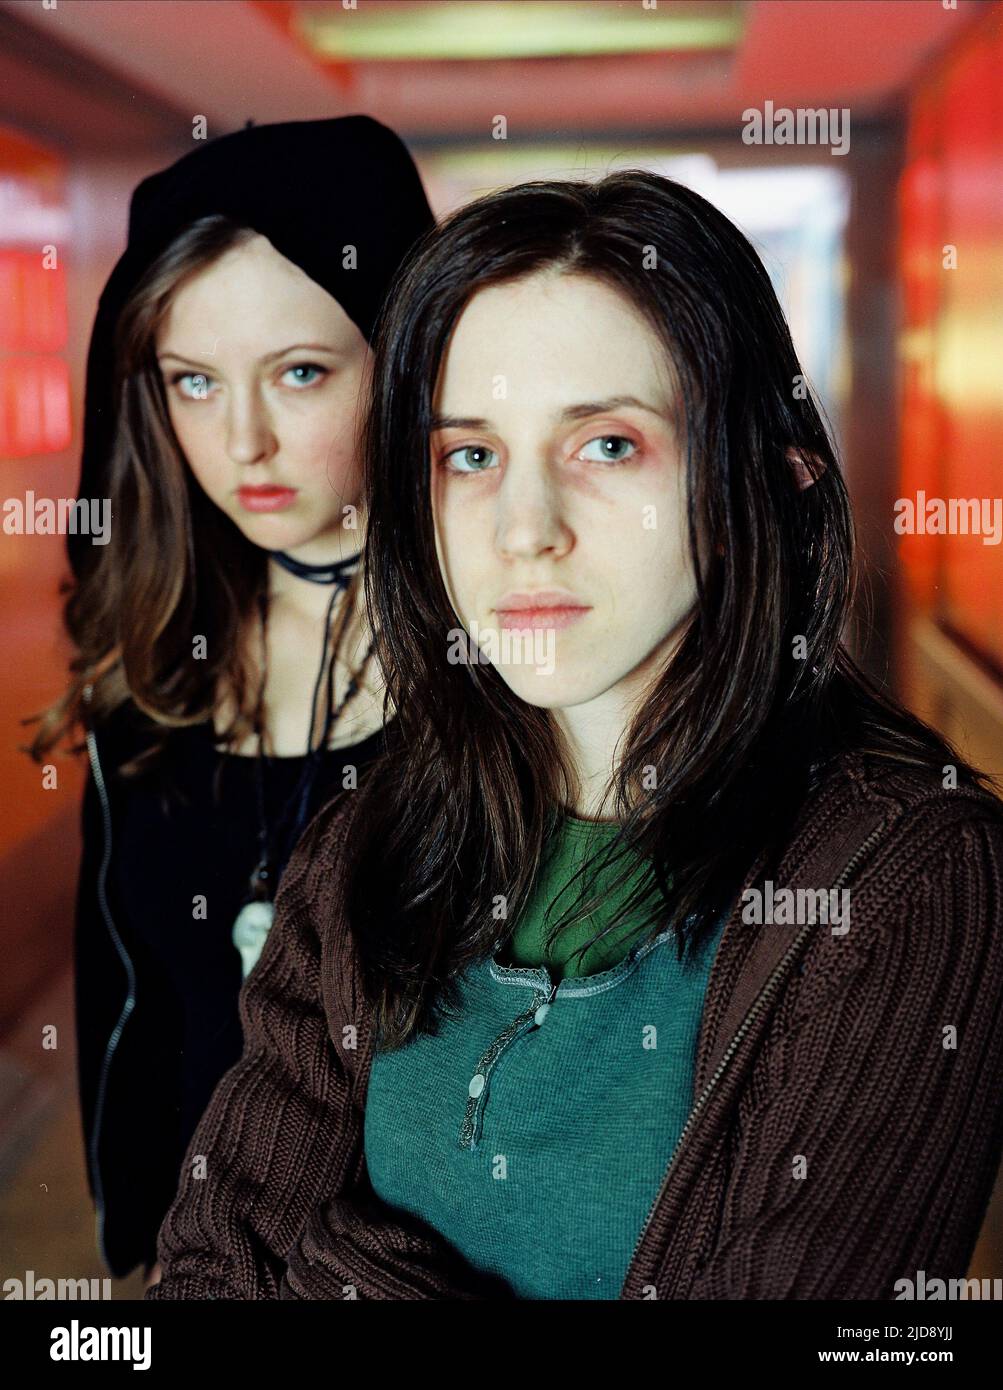 ISABELLE,PERKINS, GINGER SNAP 2: SENZA SCATTO, 2004, Foto Stock